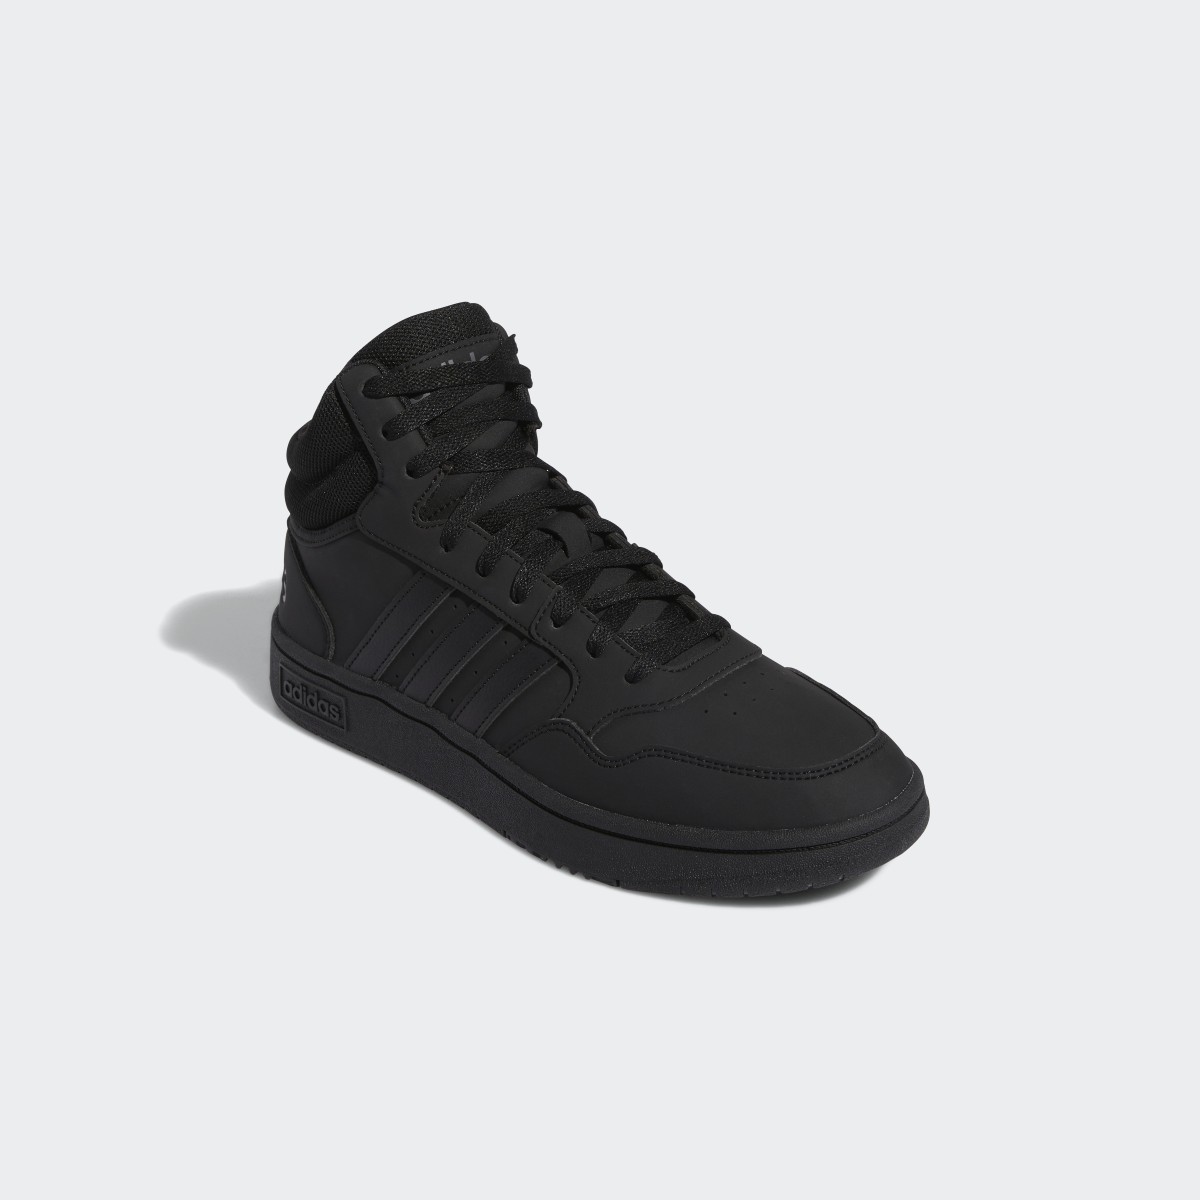 Adidas Hoops 3 Mid Lifestyle Basketball Mid Classic Shoes. 5